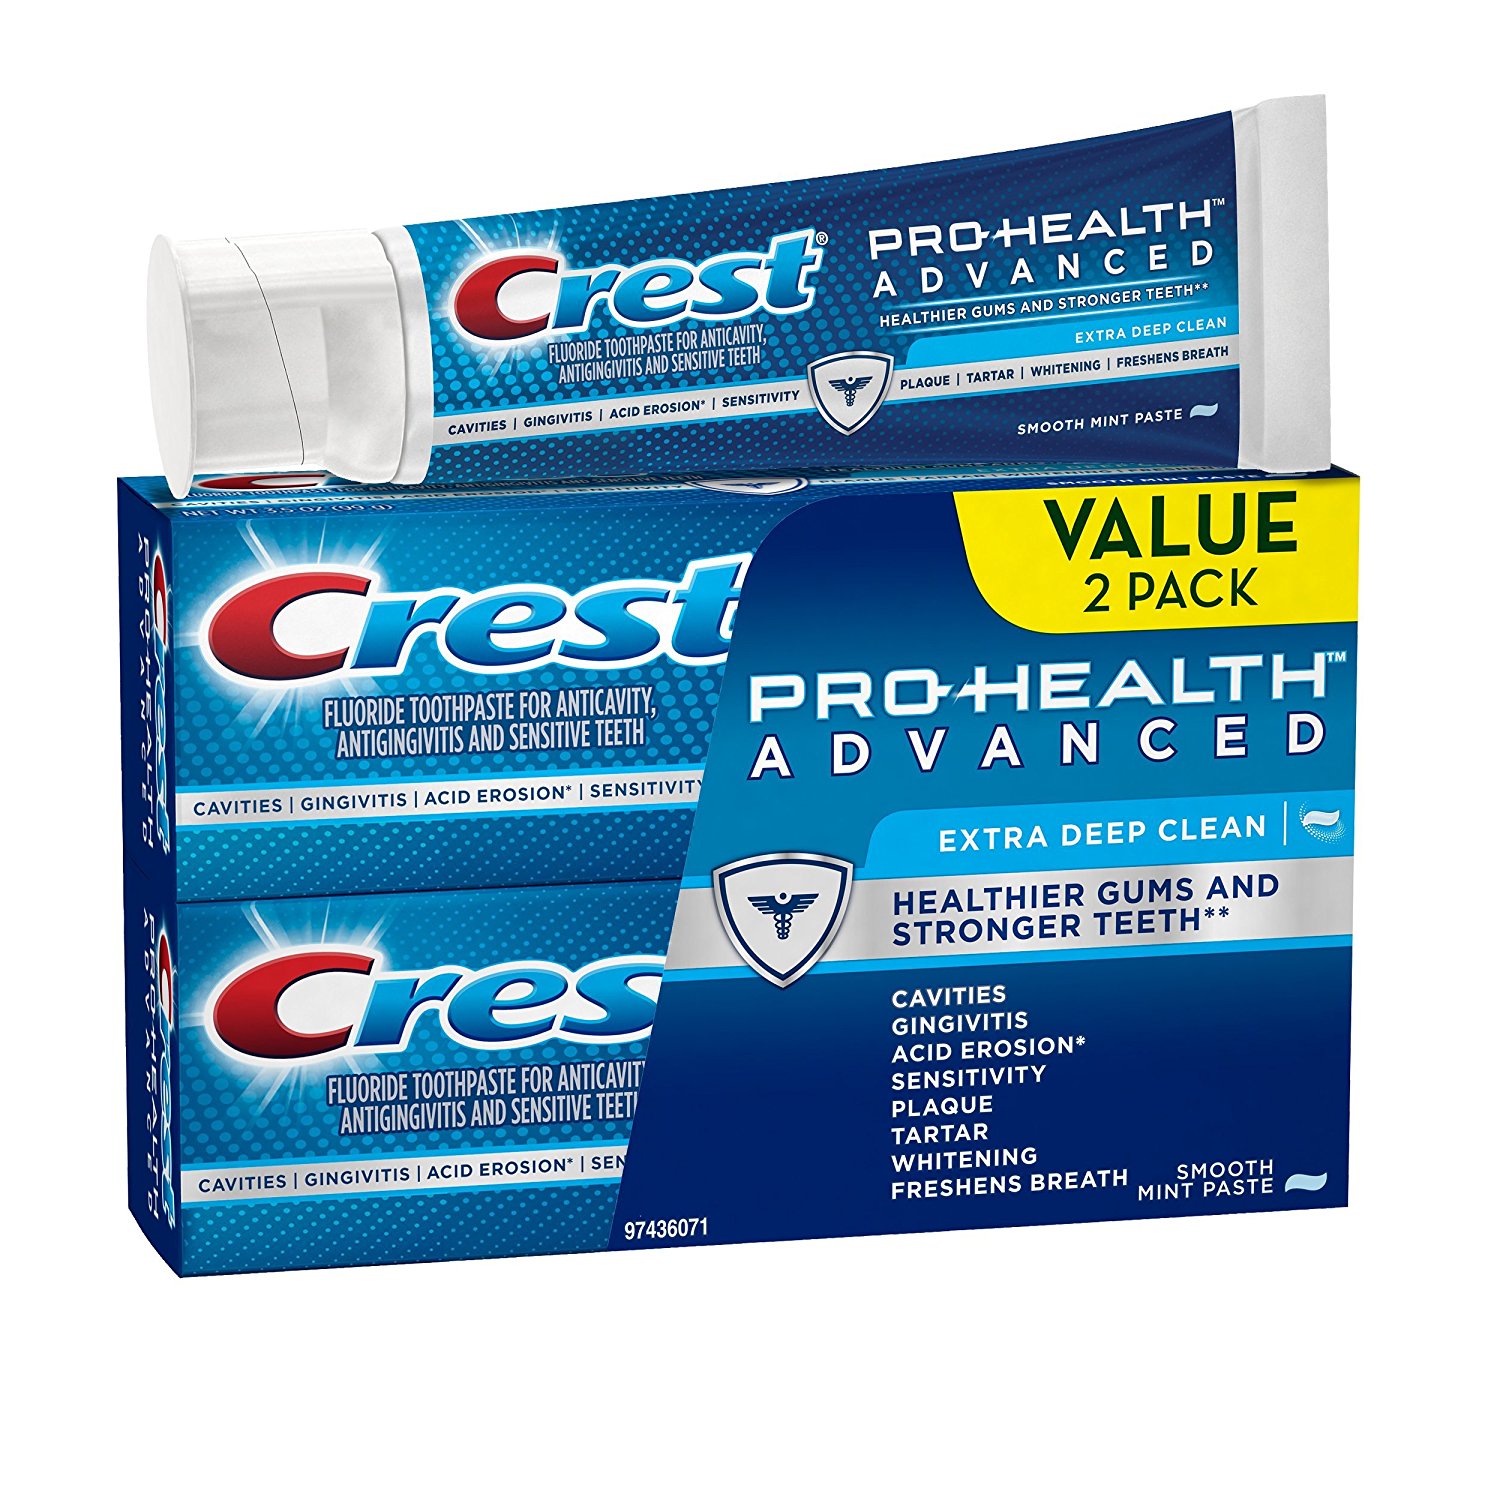 2-Pack 3.5oz Crest Pro-Health Advanced Extra Deep Clean Toothpaste  $3.45 & More + Free S&H